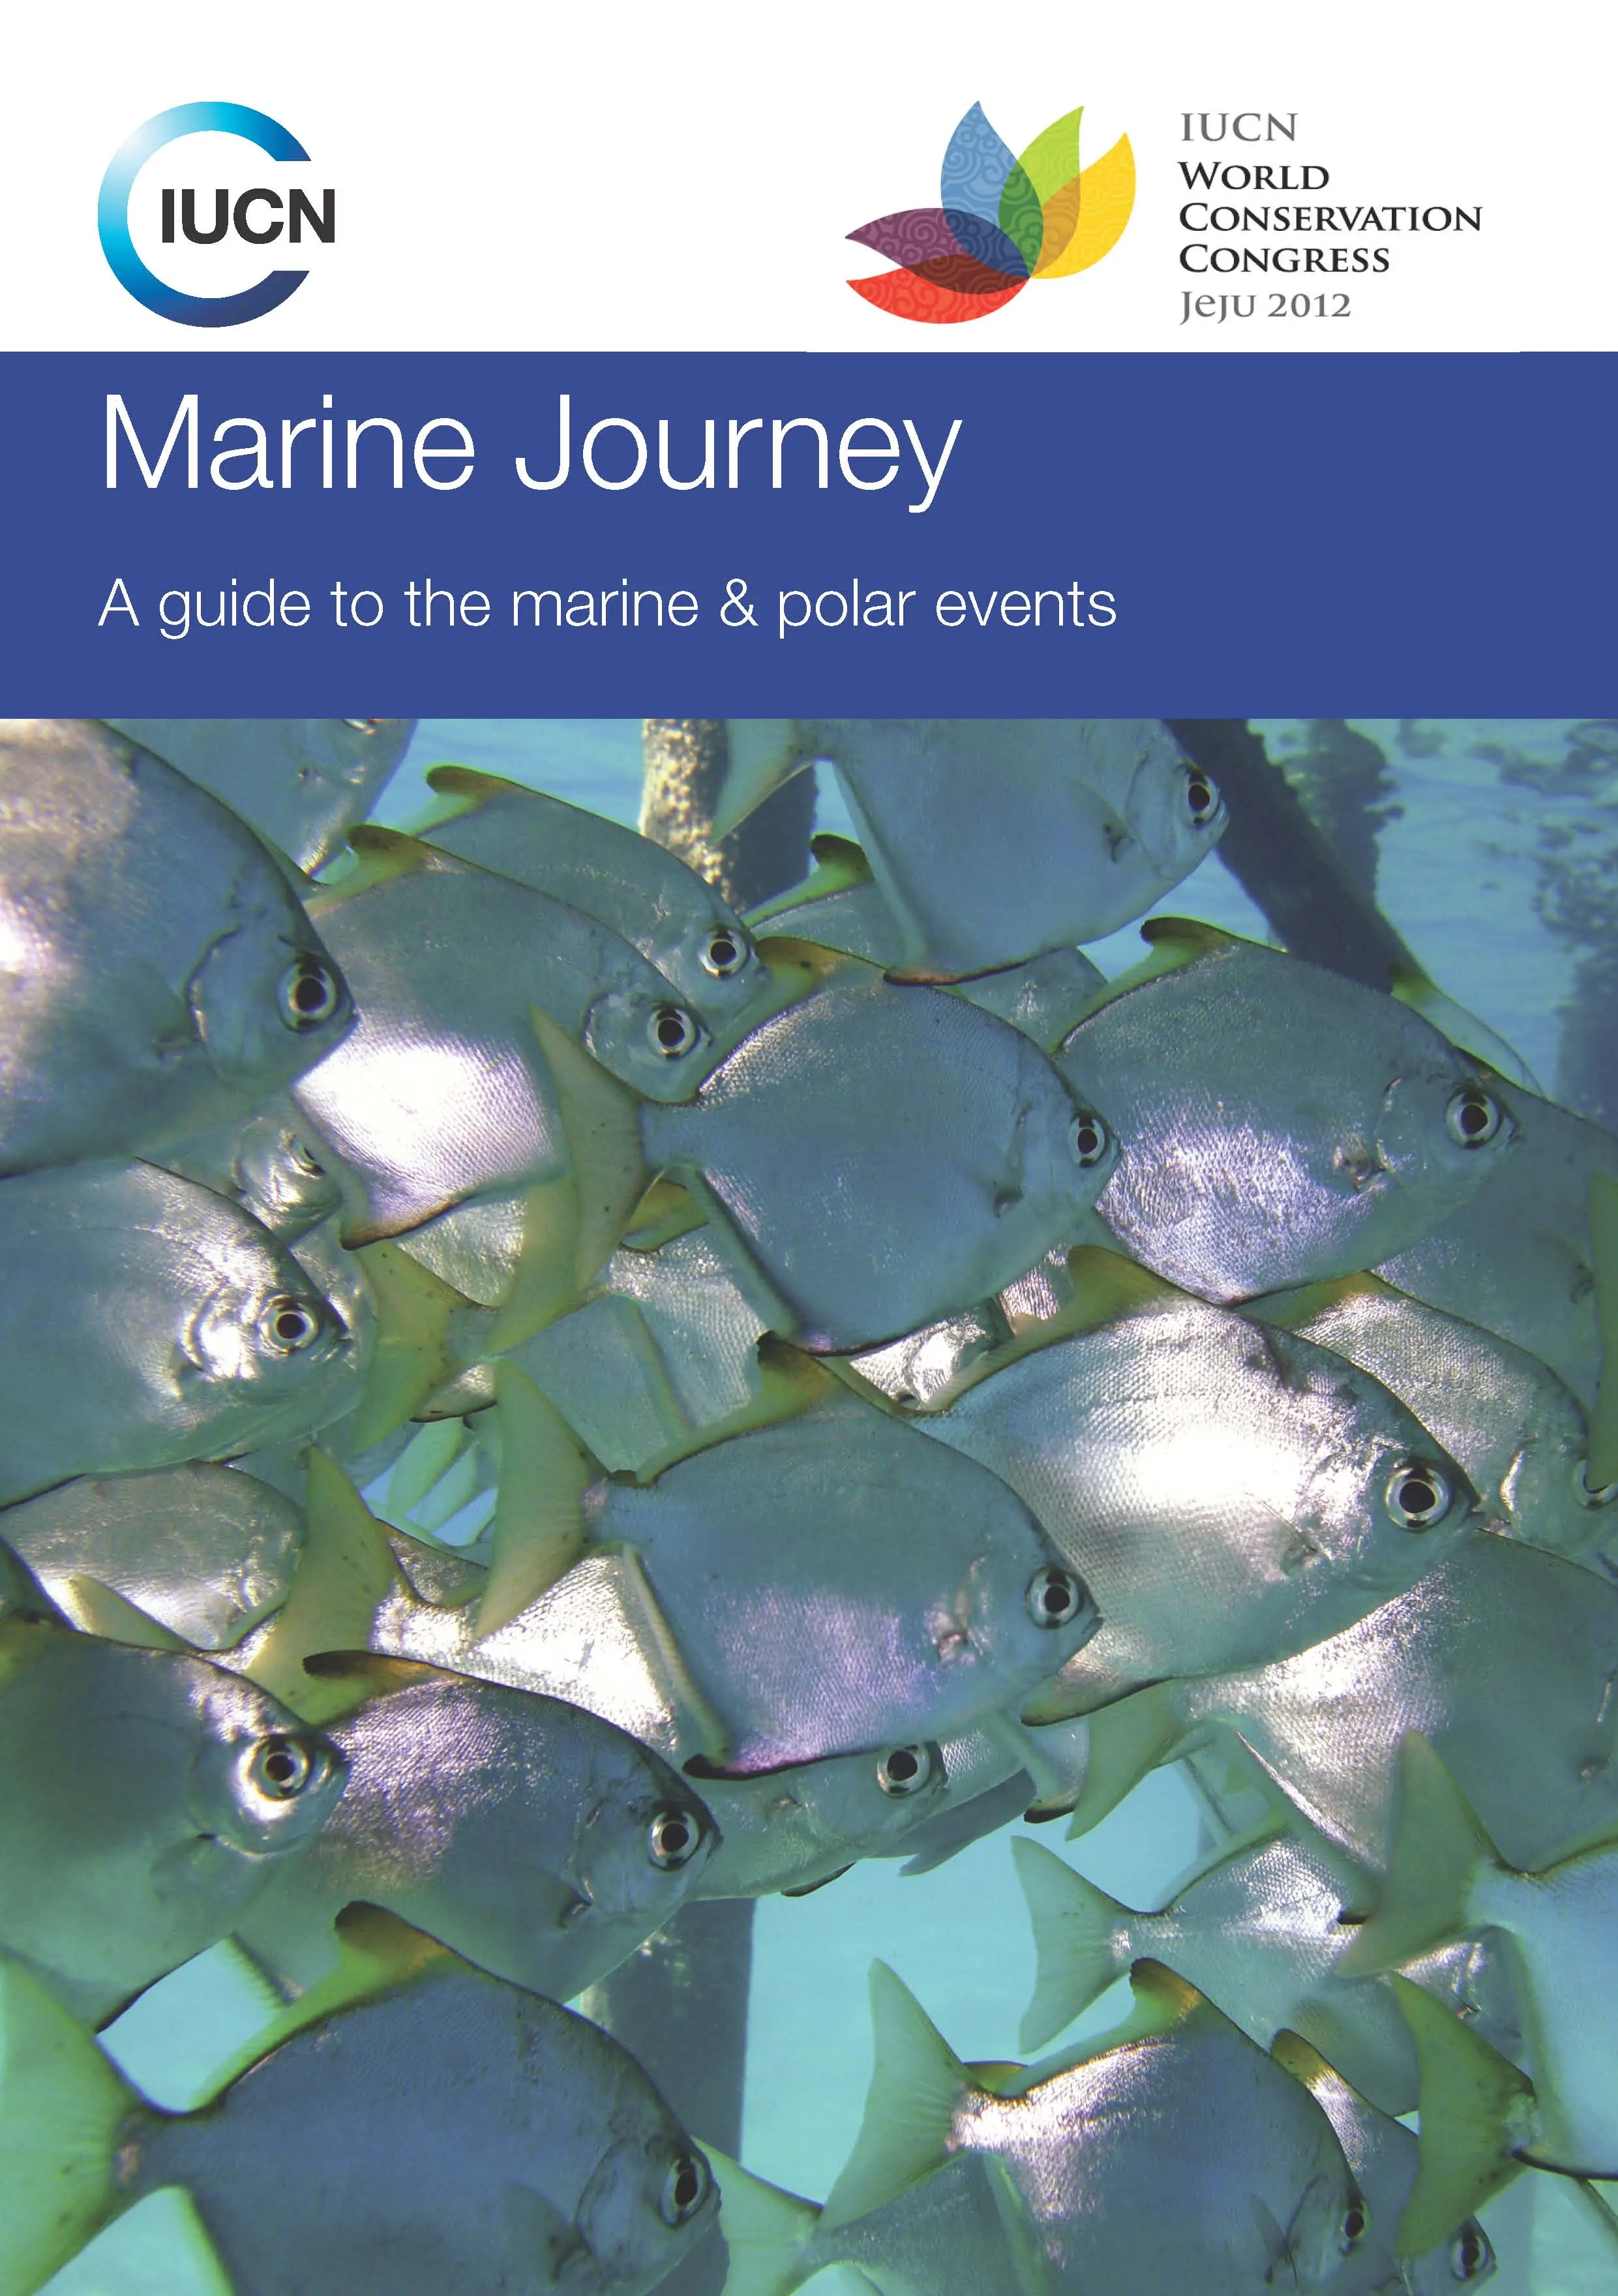 Marine Journey - A guide to the marine & polar events at the IUCN World Conservation Congress, Jeju 2012